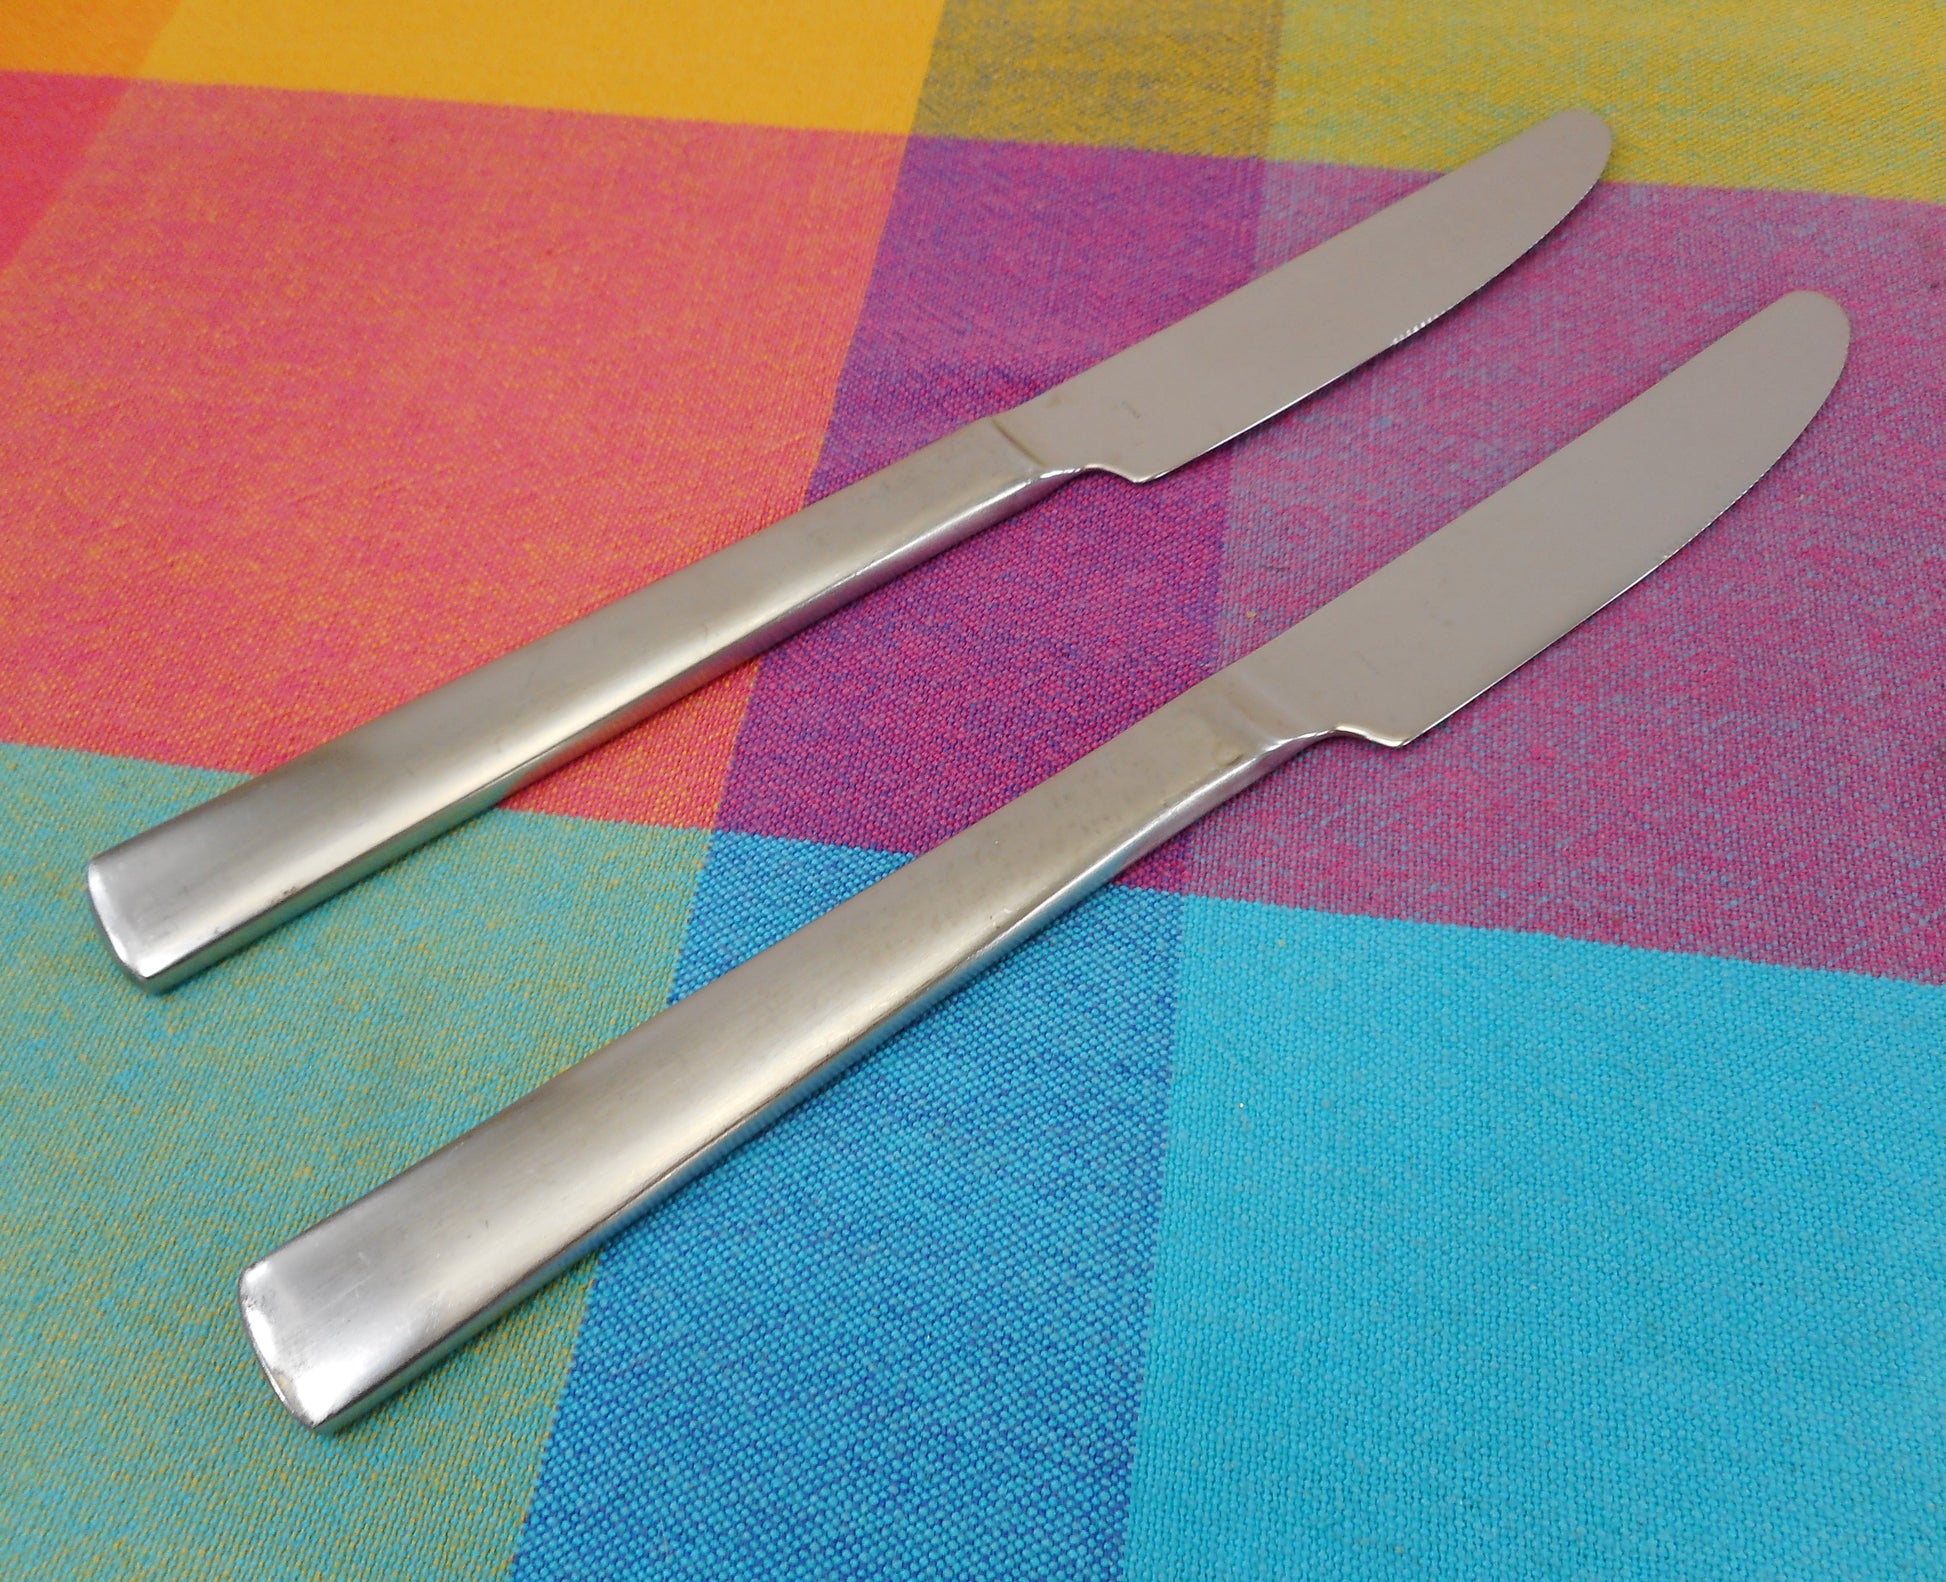 Ginkgo 331 Norse 18-10 Satin Stainless Used Flatware - 2 Knives 8-7/8"